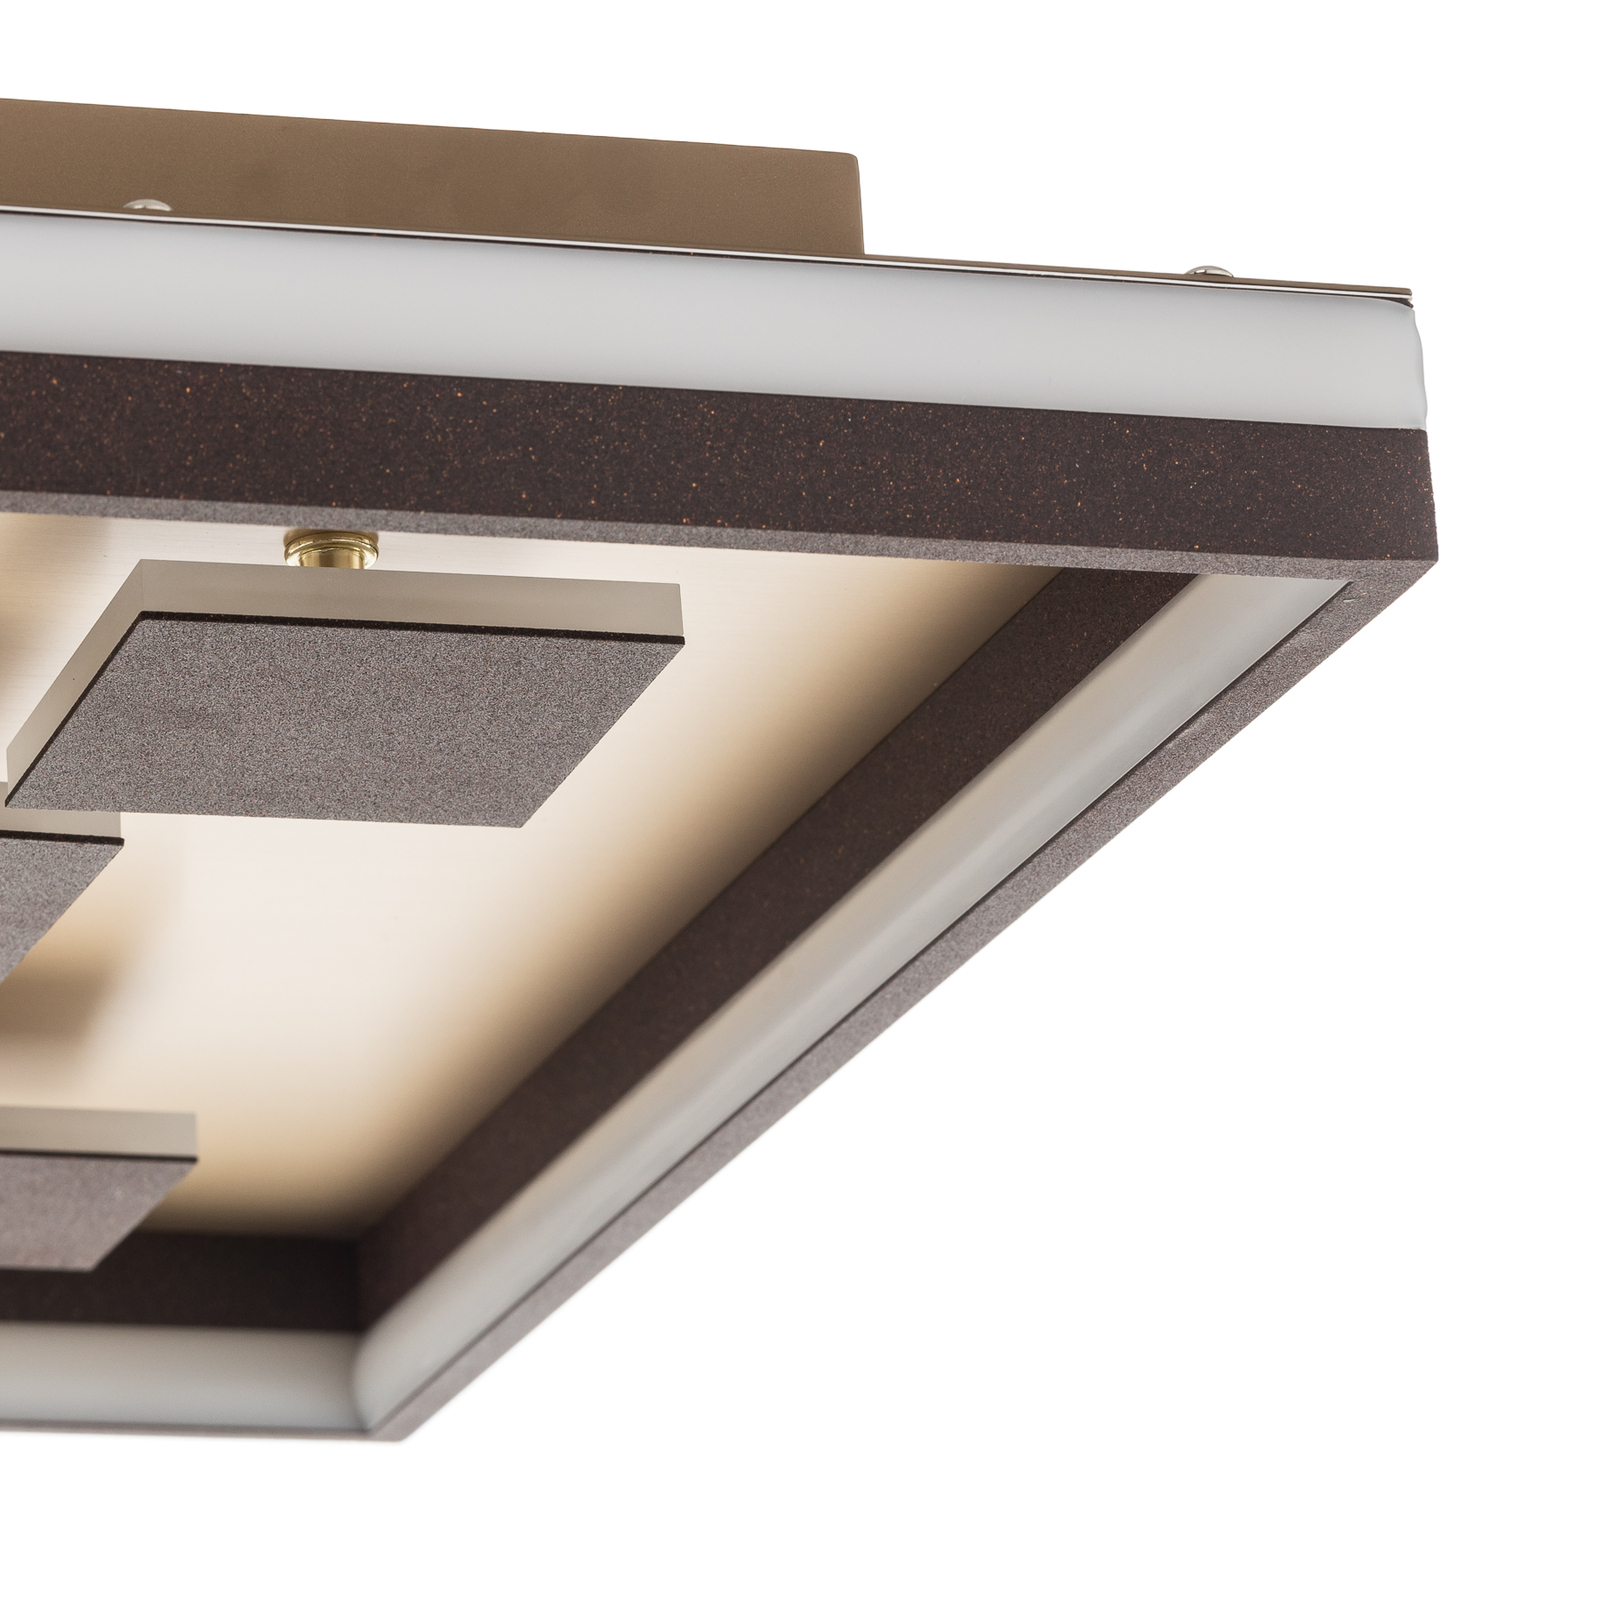 Rico LED ceiling light, dimmable, angular, brown